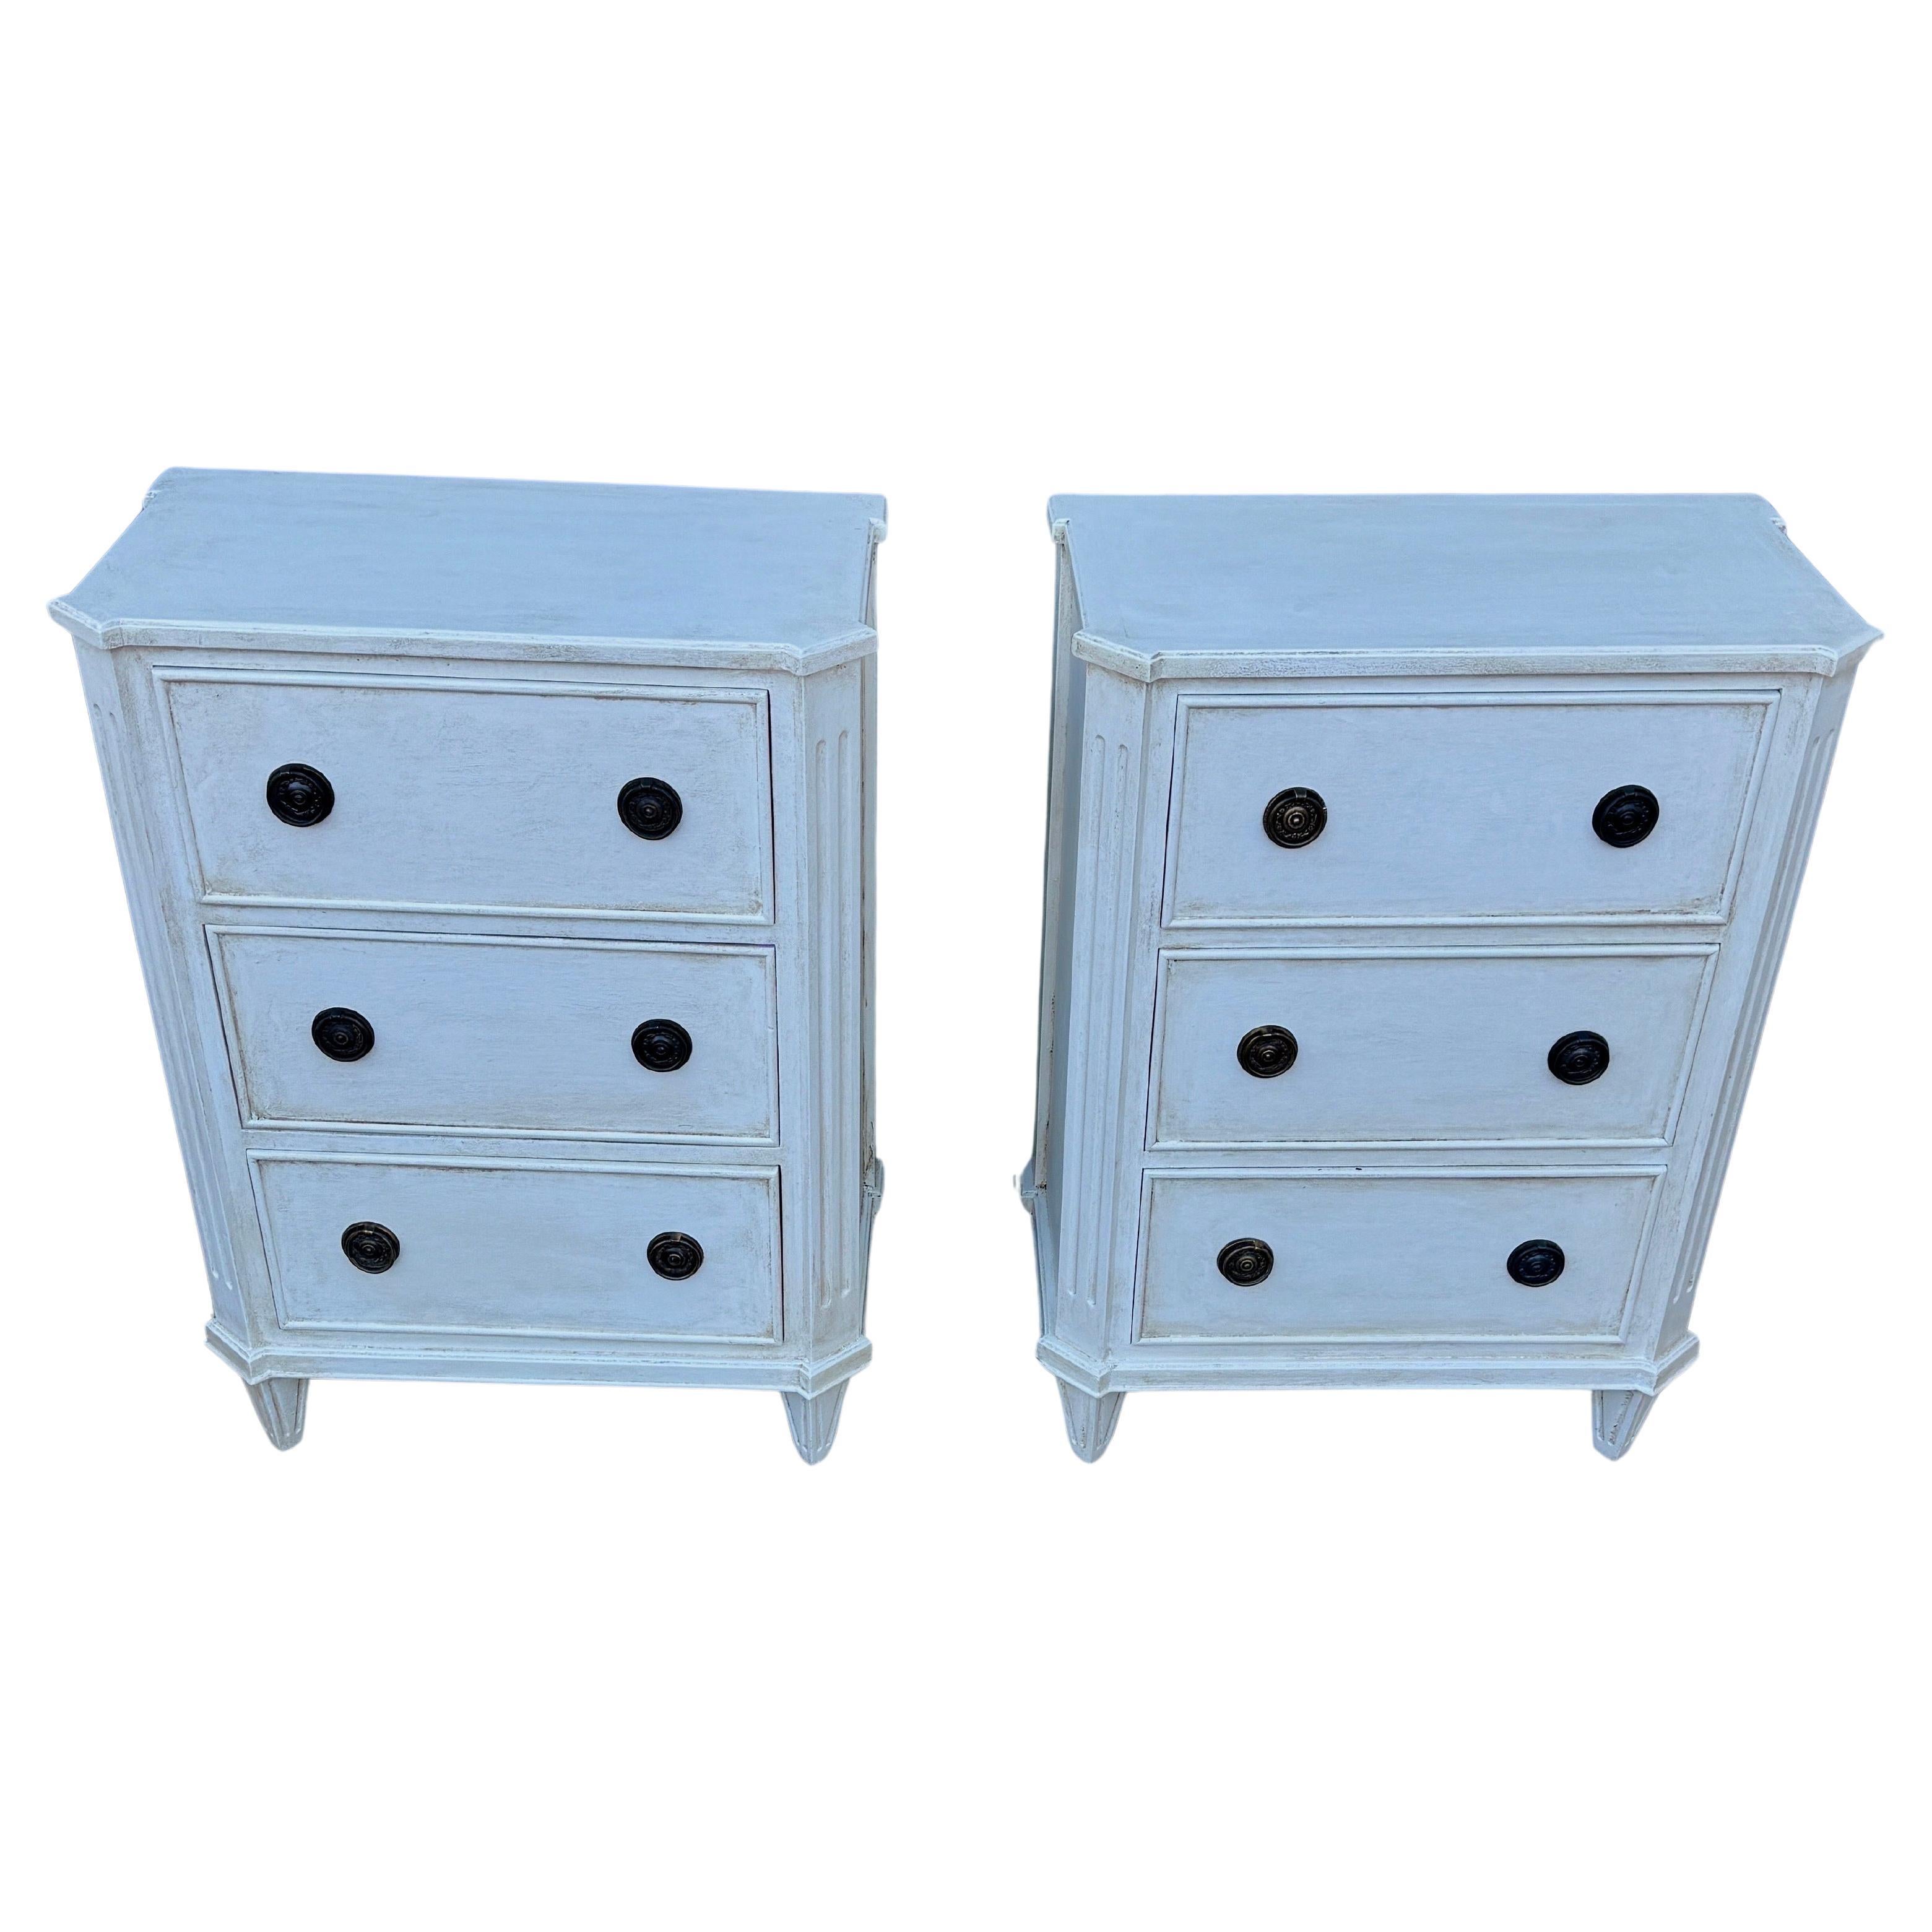 Painted Gustavian Style Chest of Drawers or Side Tables, A Pair 

These classic Swedish style three drawer hand painted chests, small commodes or end tables have been constructed from solid wood with a hand-applied distressed finish and feature